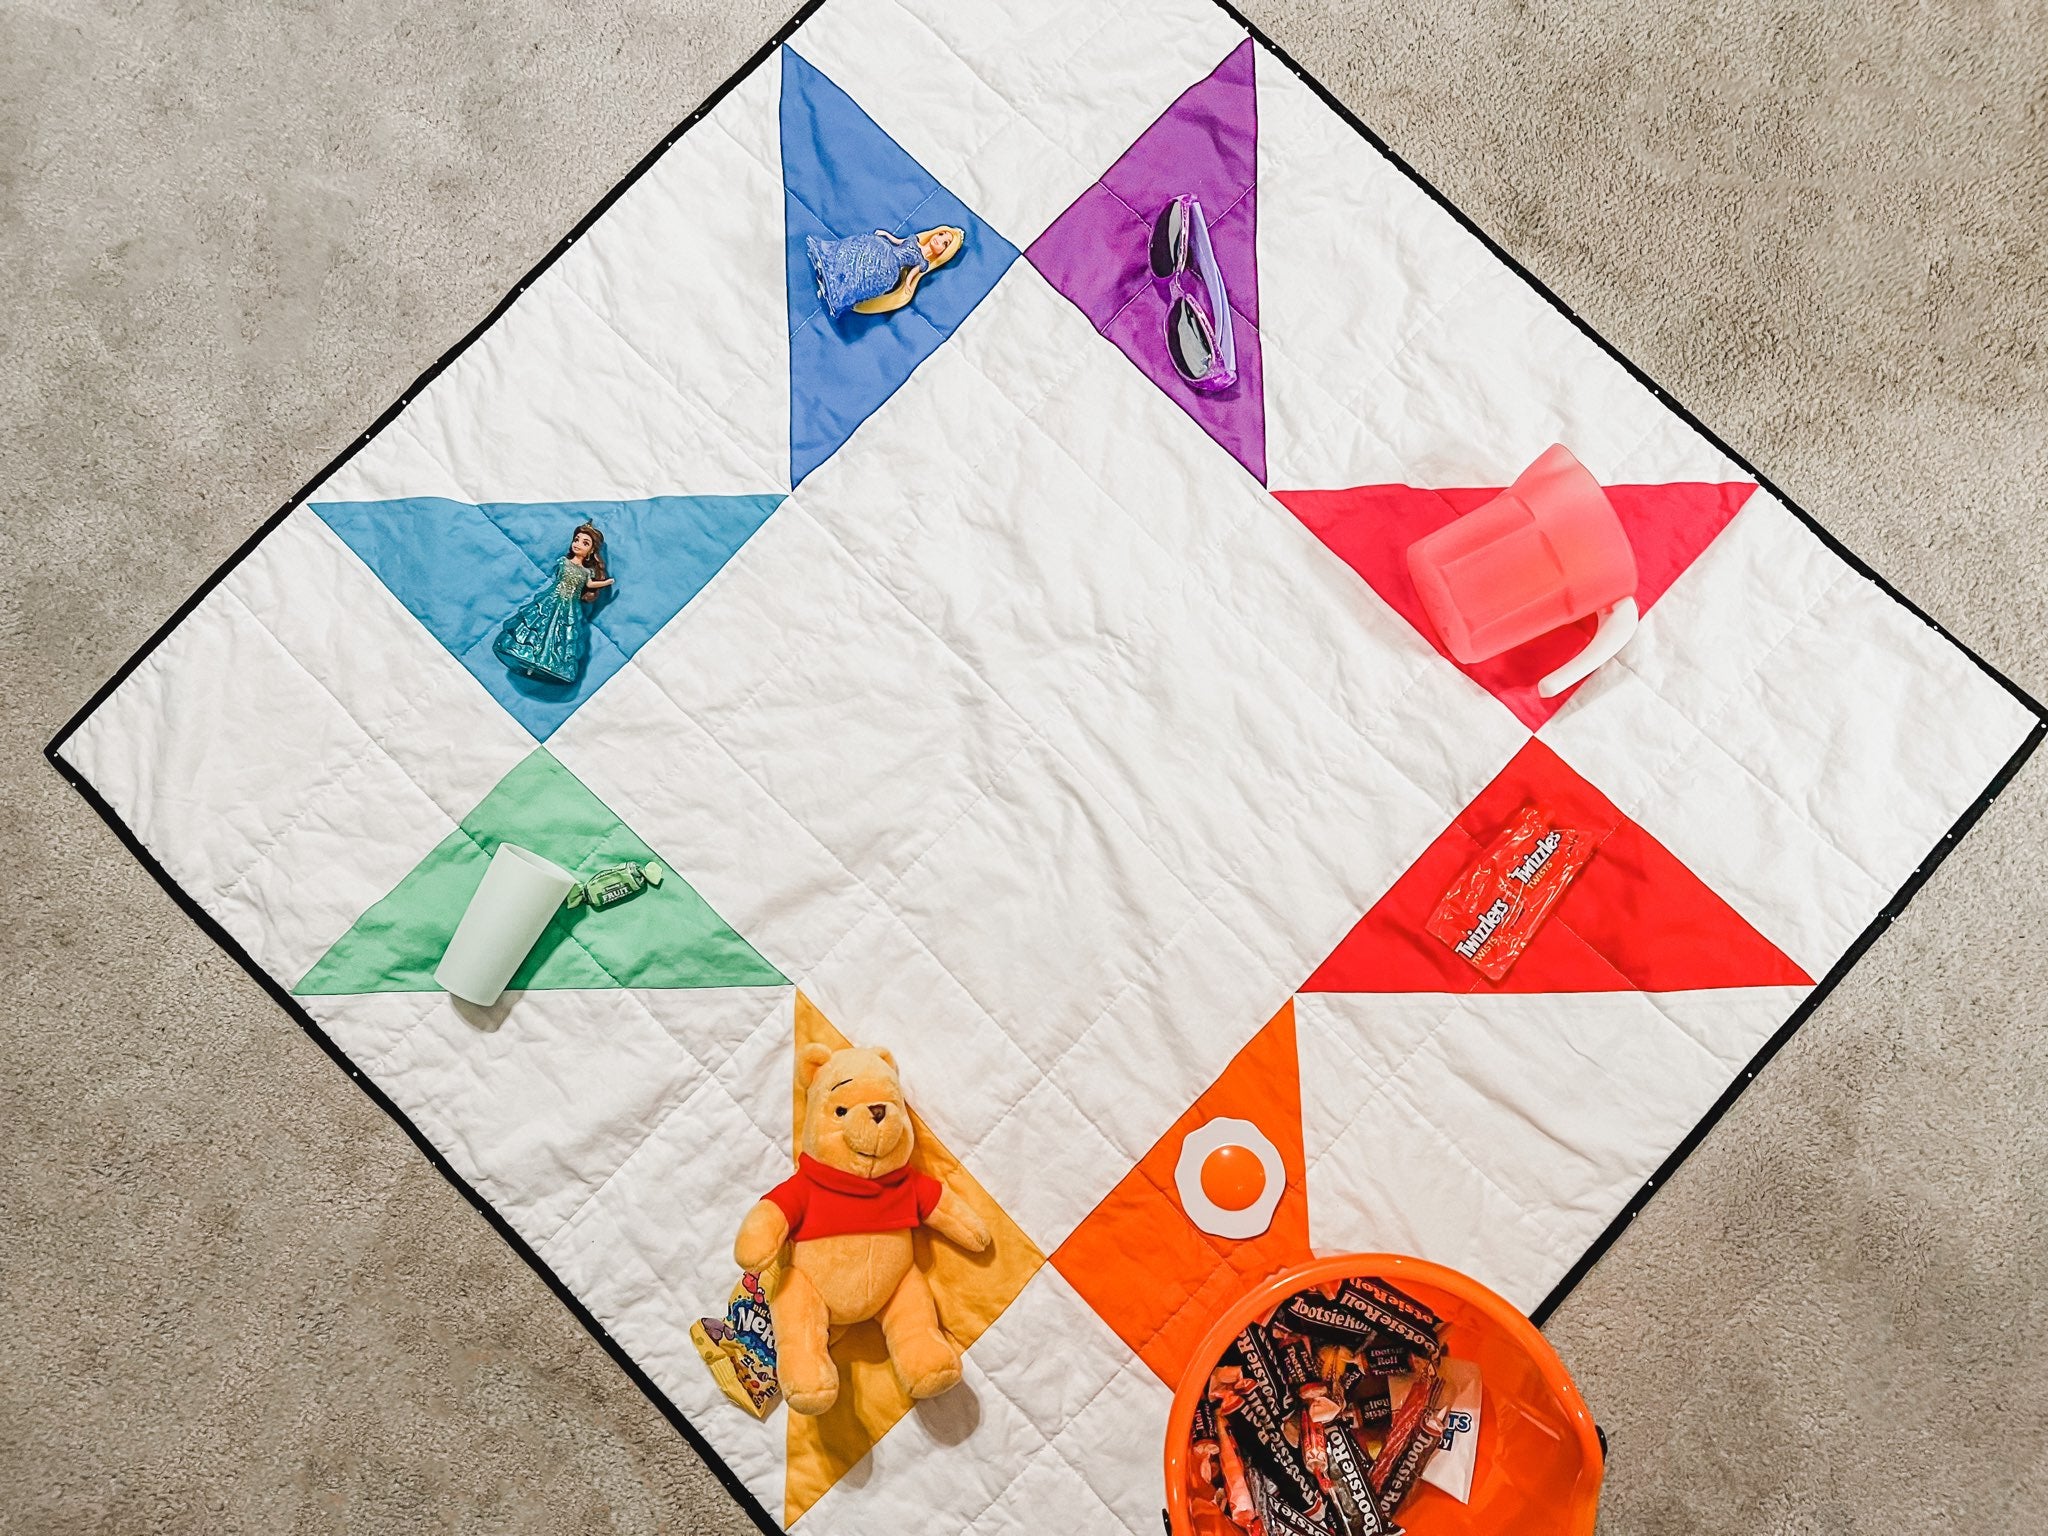 rainbow sawtooth star quilt on the floor with matching toys placed over each color